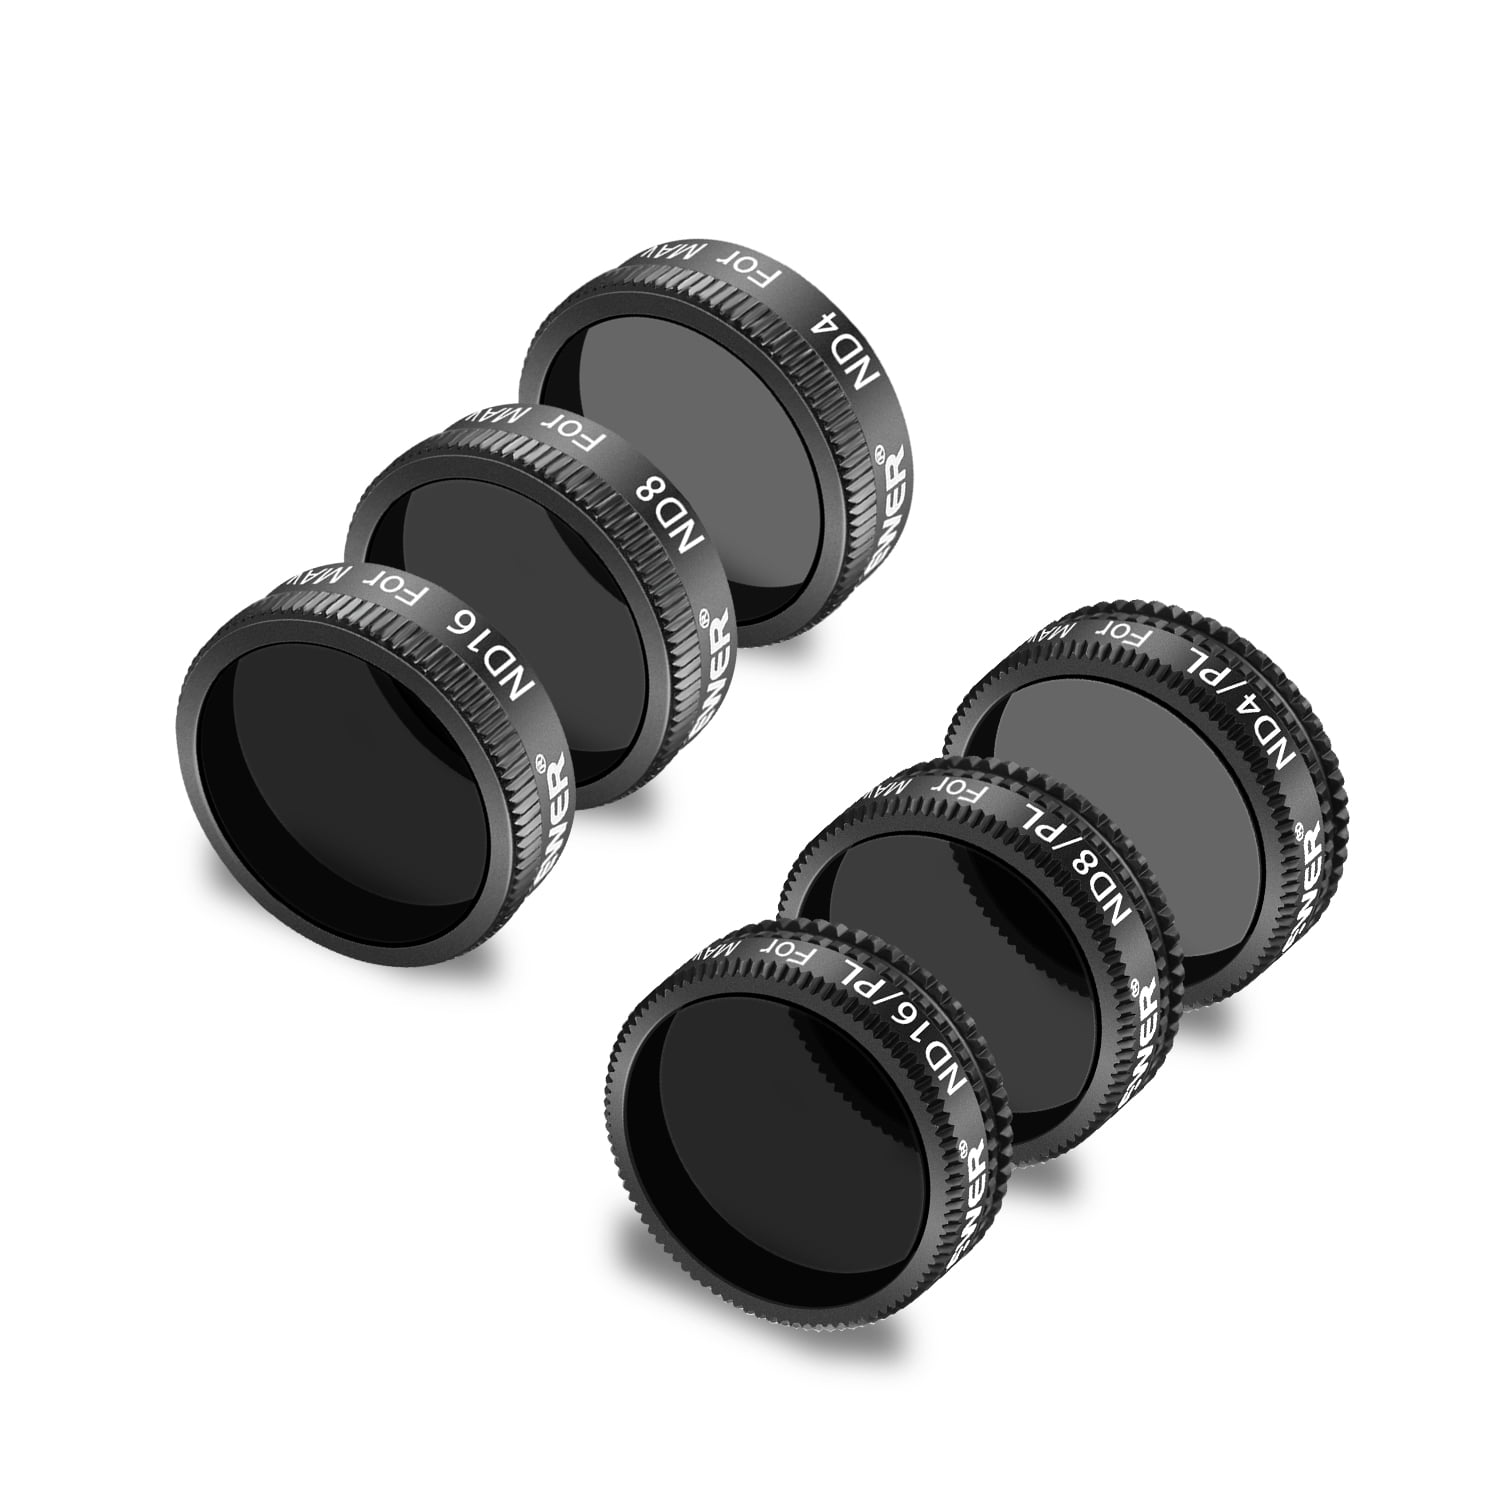 ND8 ND4/PL Black ND16 ND8/PL Made of Multi Coated Waterproof Aluminum Alloy Frame Optical Glass ND16/PL Neewer 6 Pieces Pro Lens Filter Kit for DJI Mavic Air Drone Quadcopter Includes: ND4 